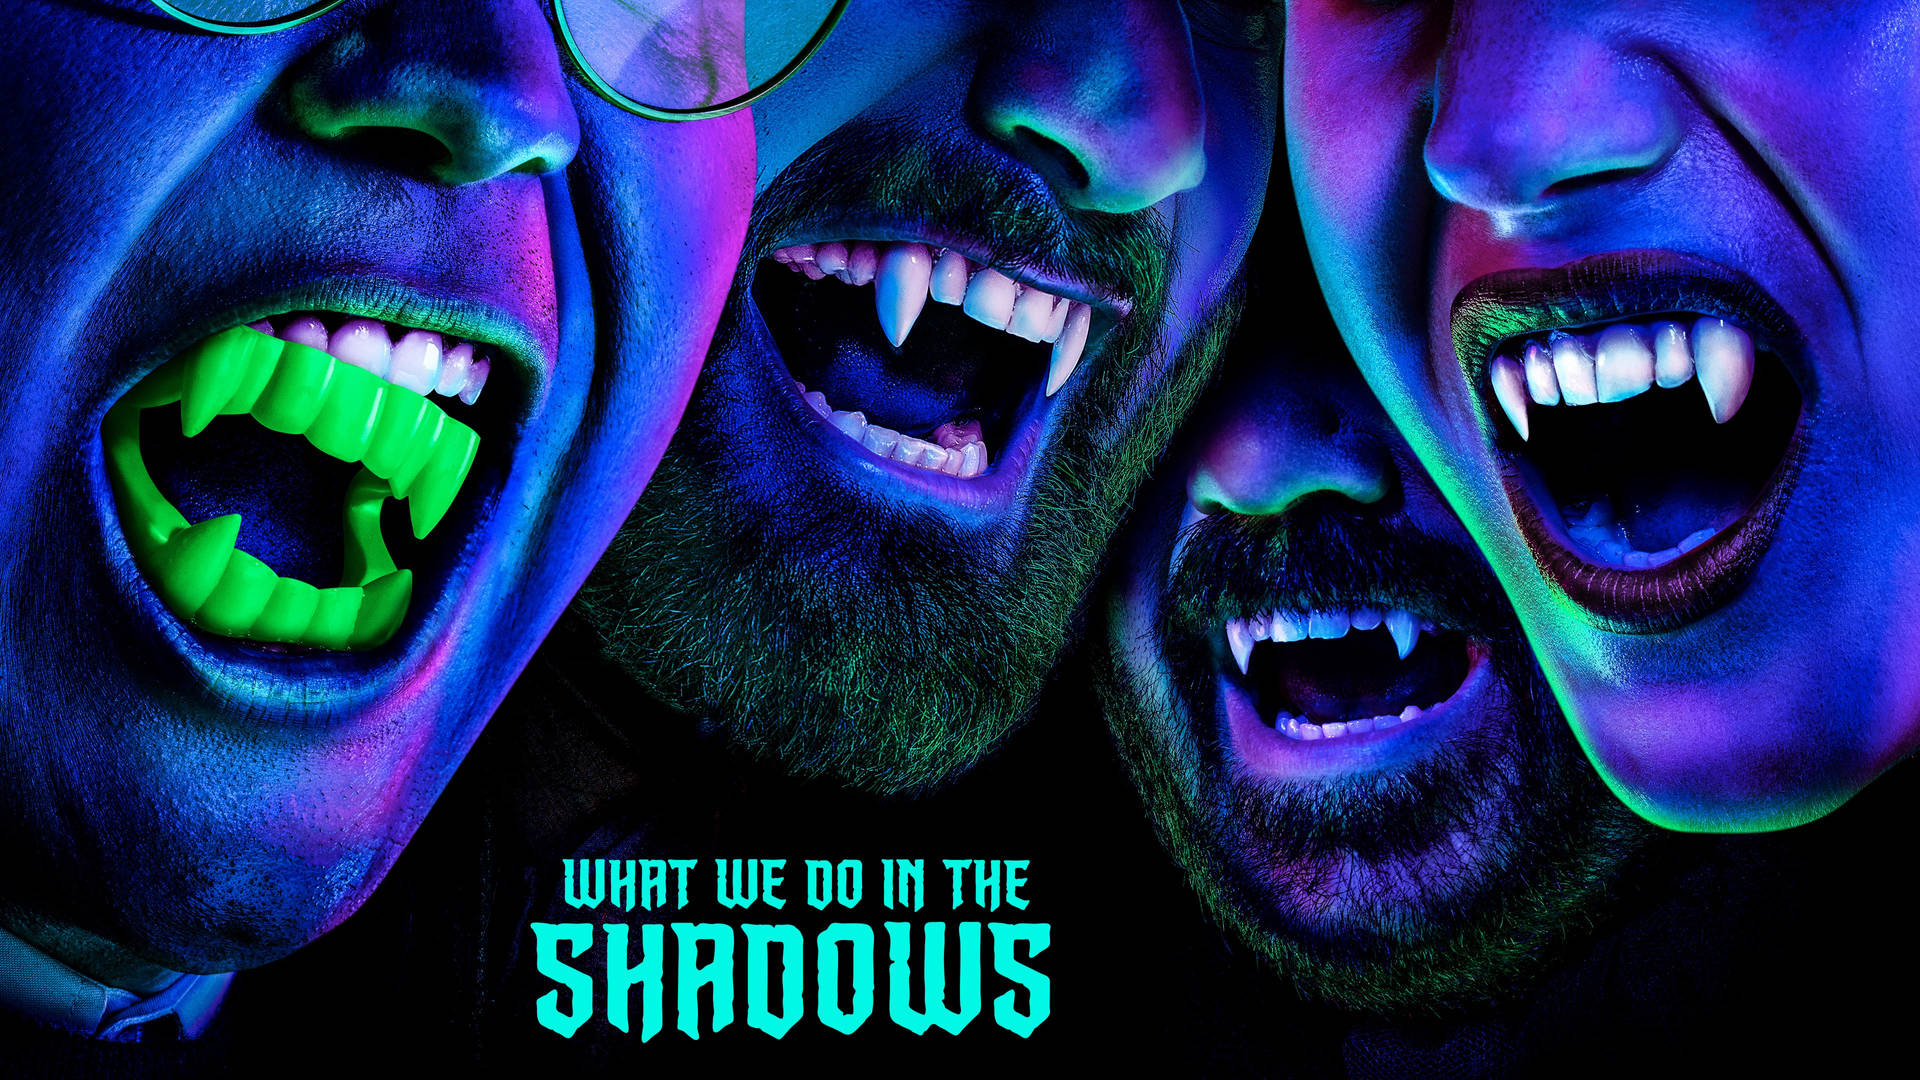 Top 999+ What We Do In The Shadows Wallpaper Full HD, 4K✅Free to Use